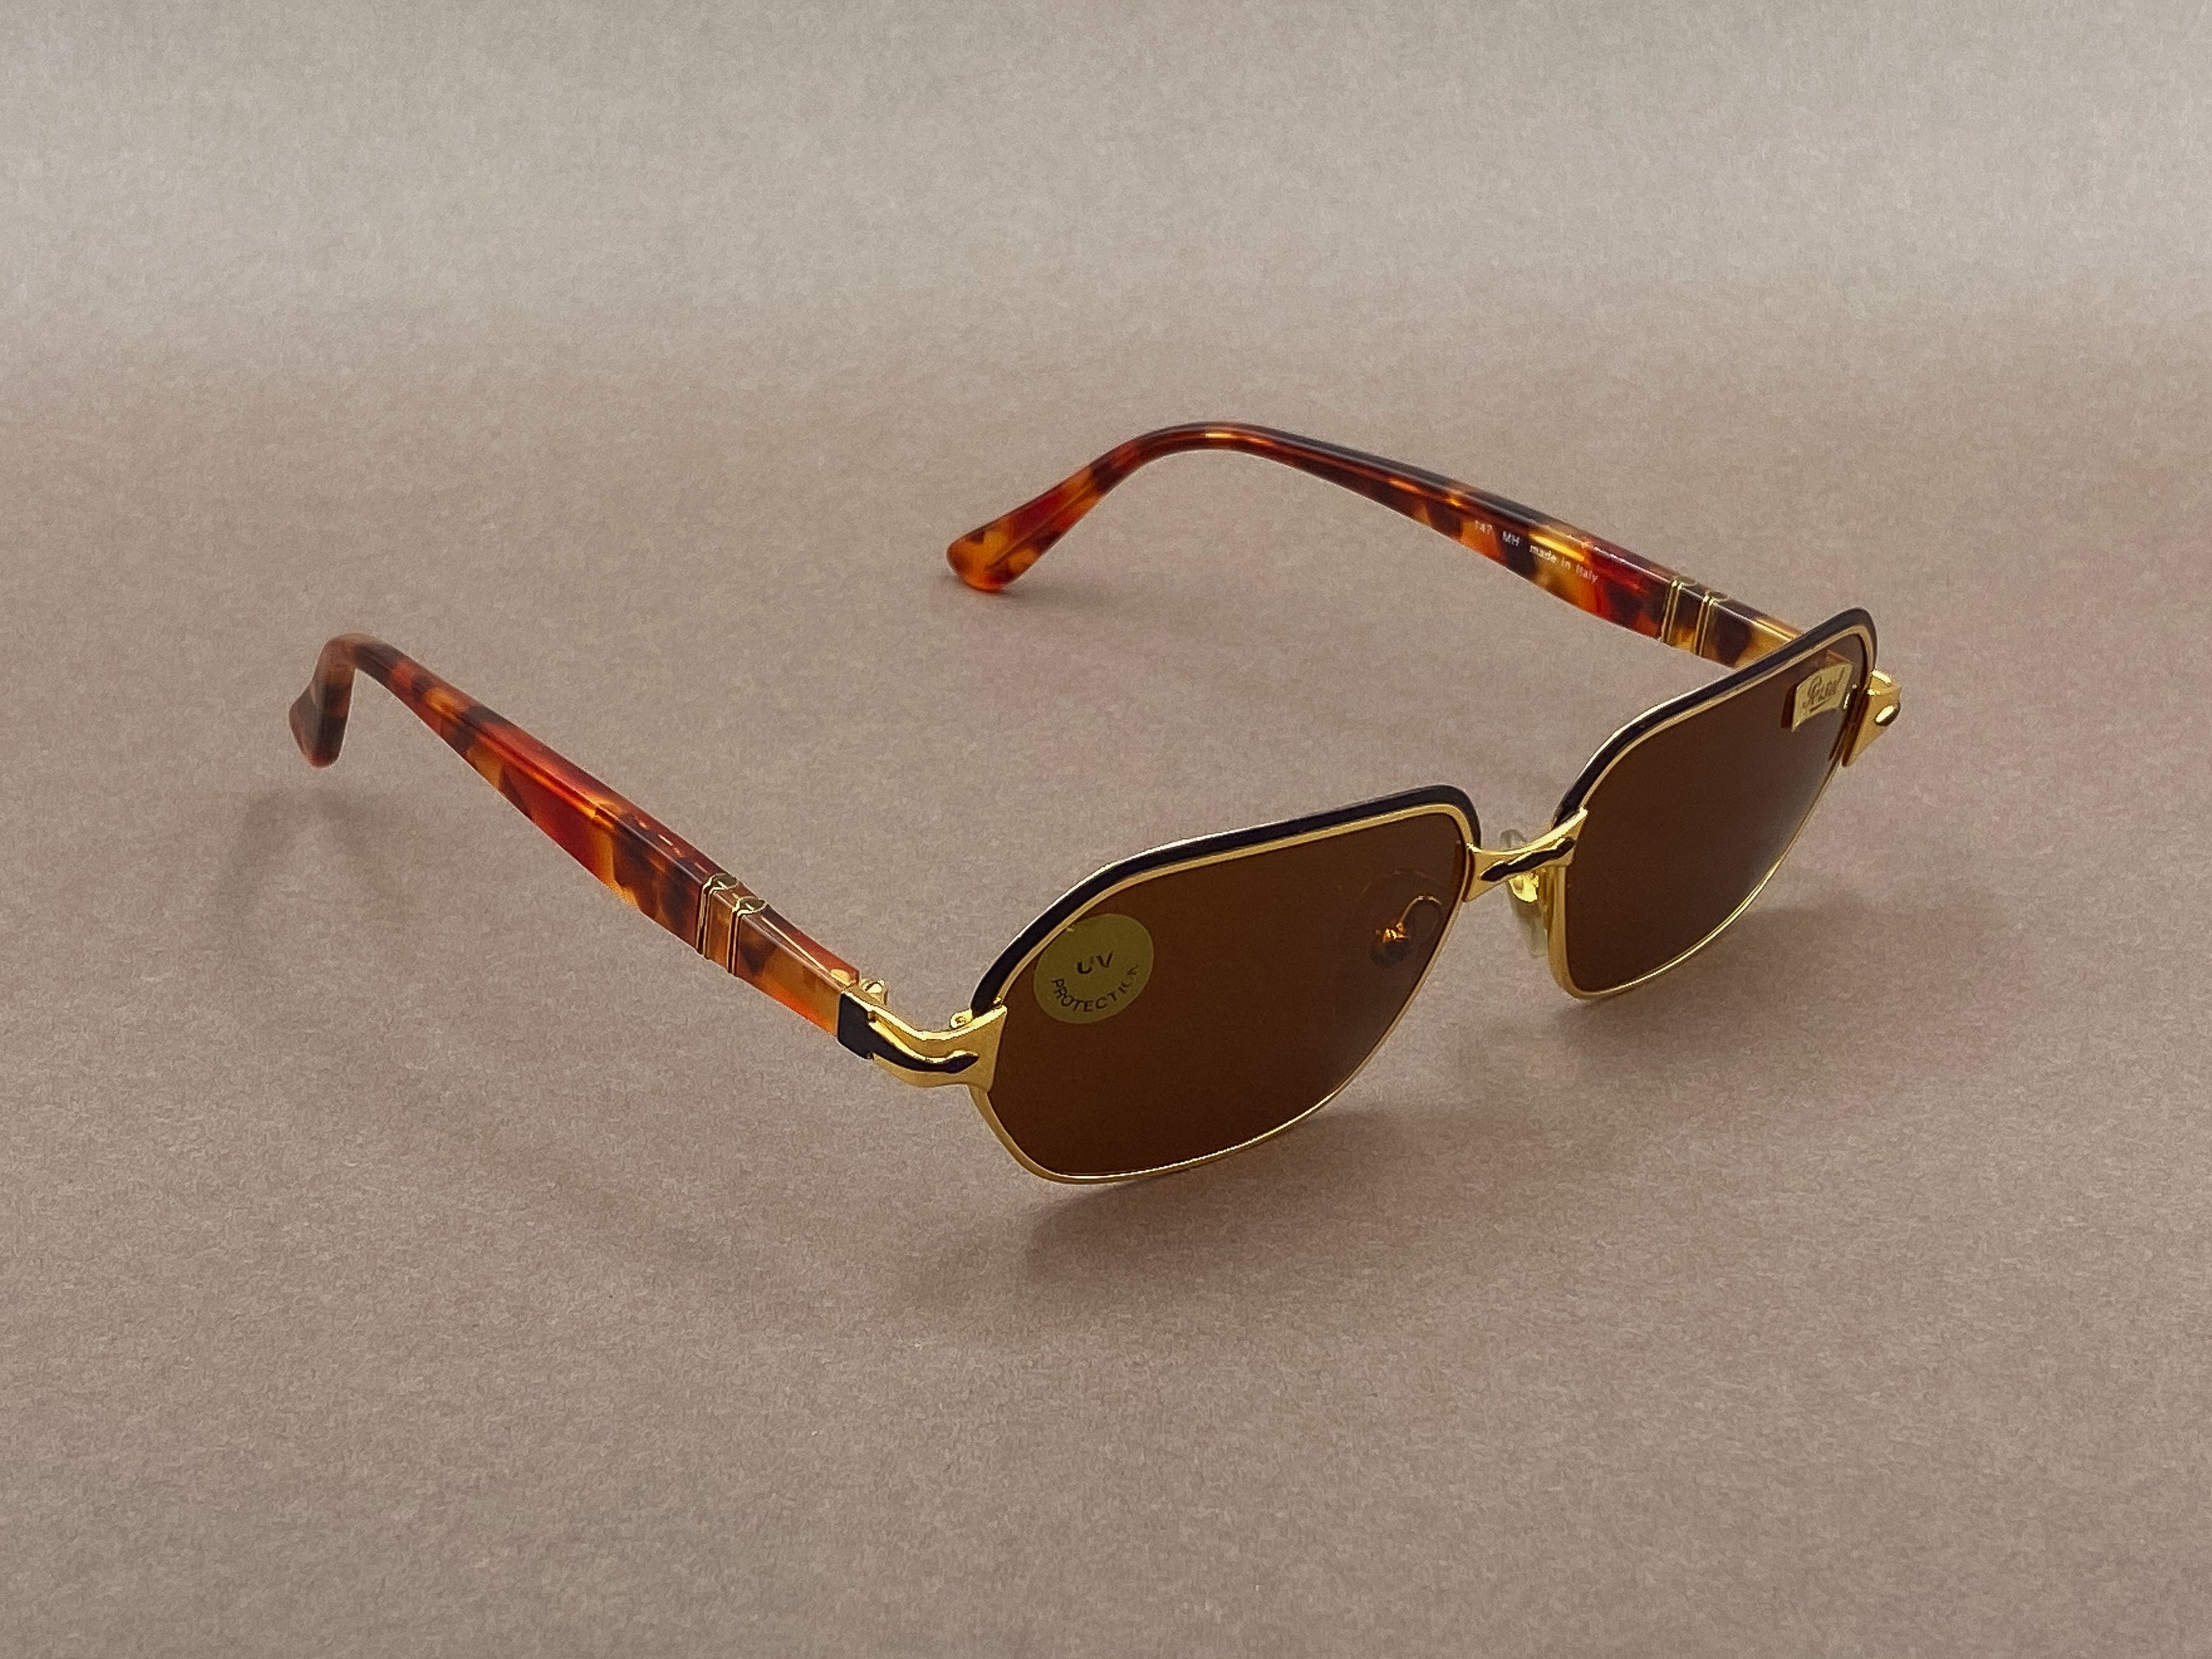 Persol Zeus sunglasses from the Mythis collection